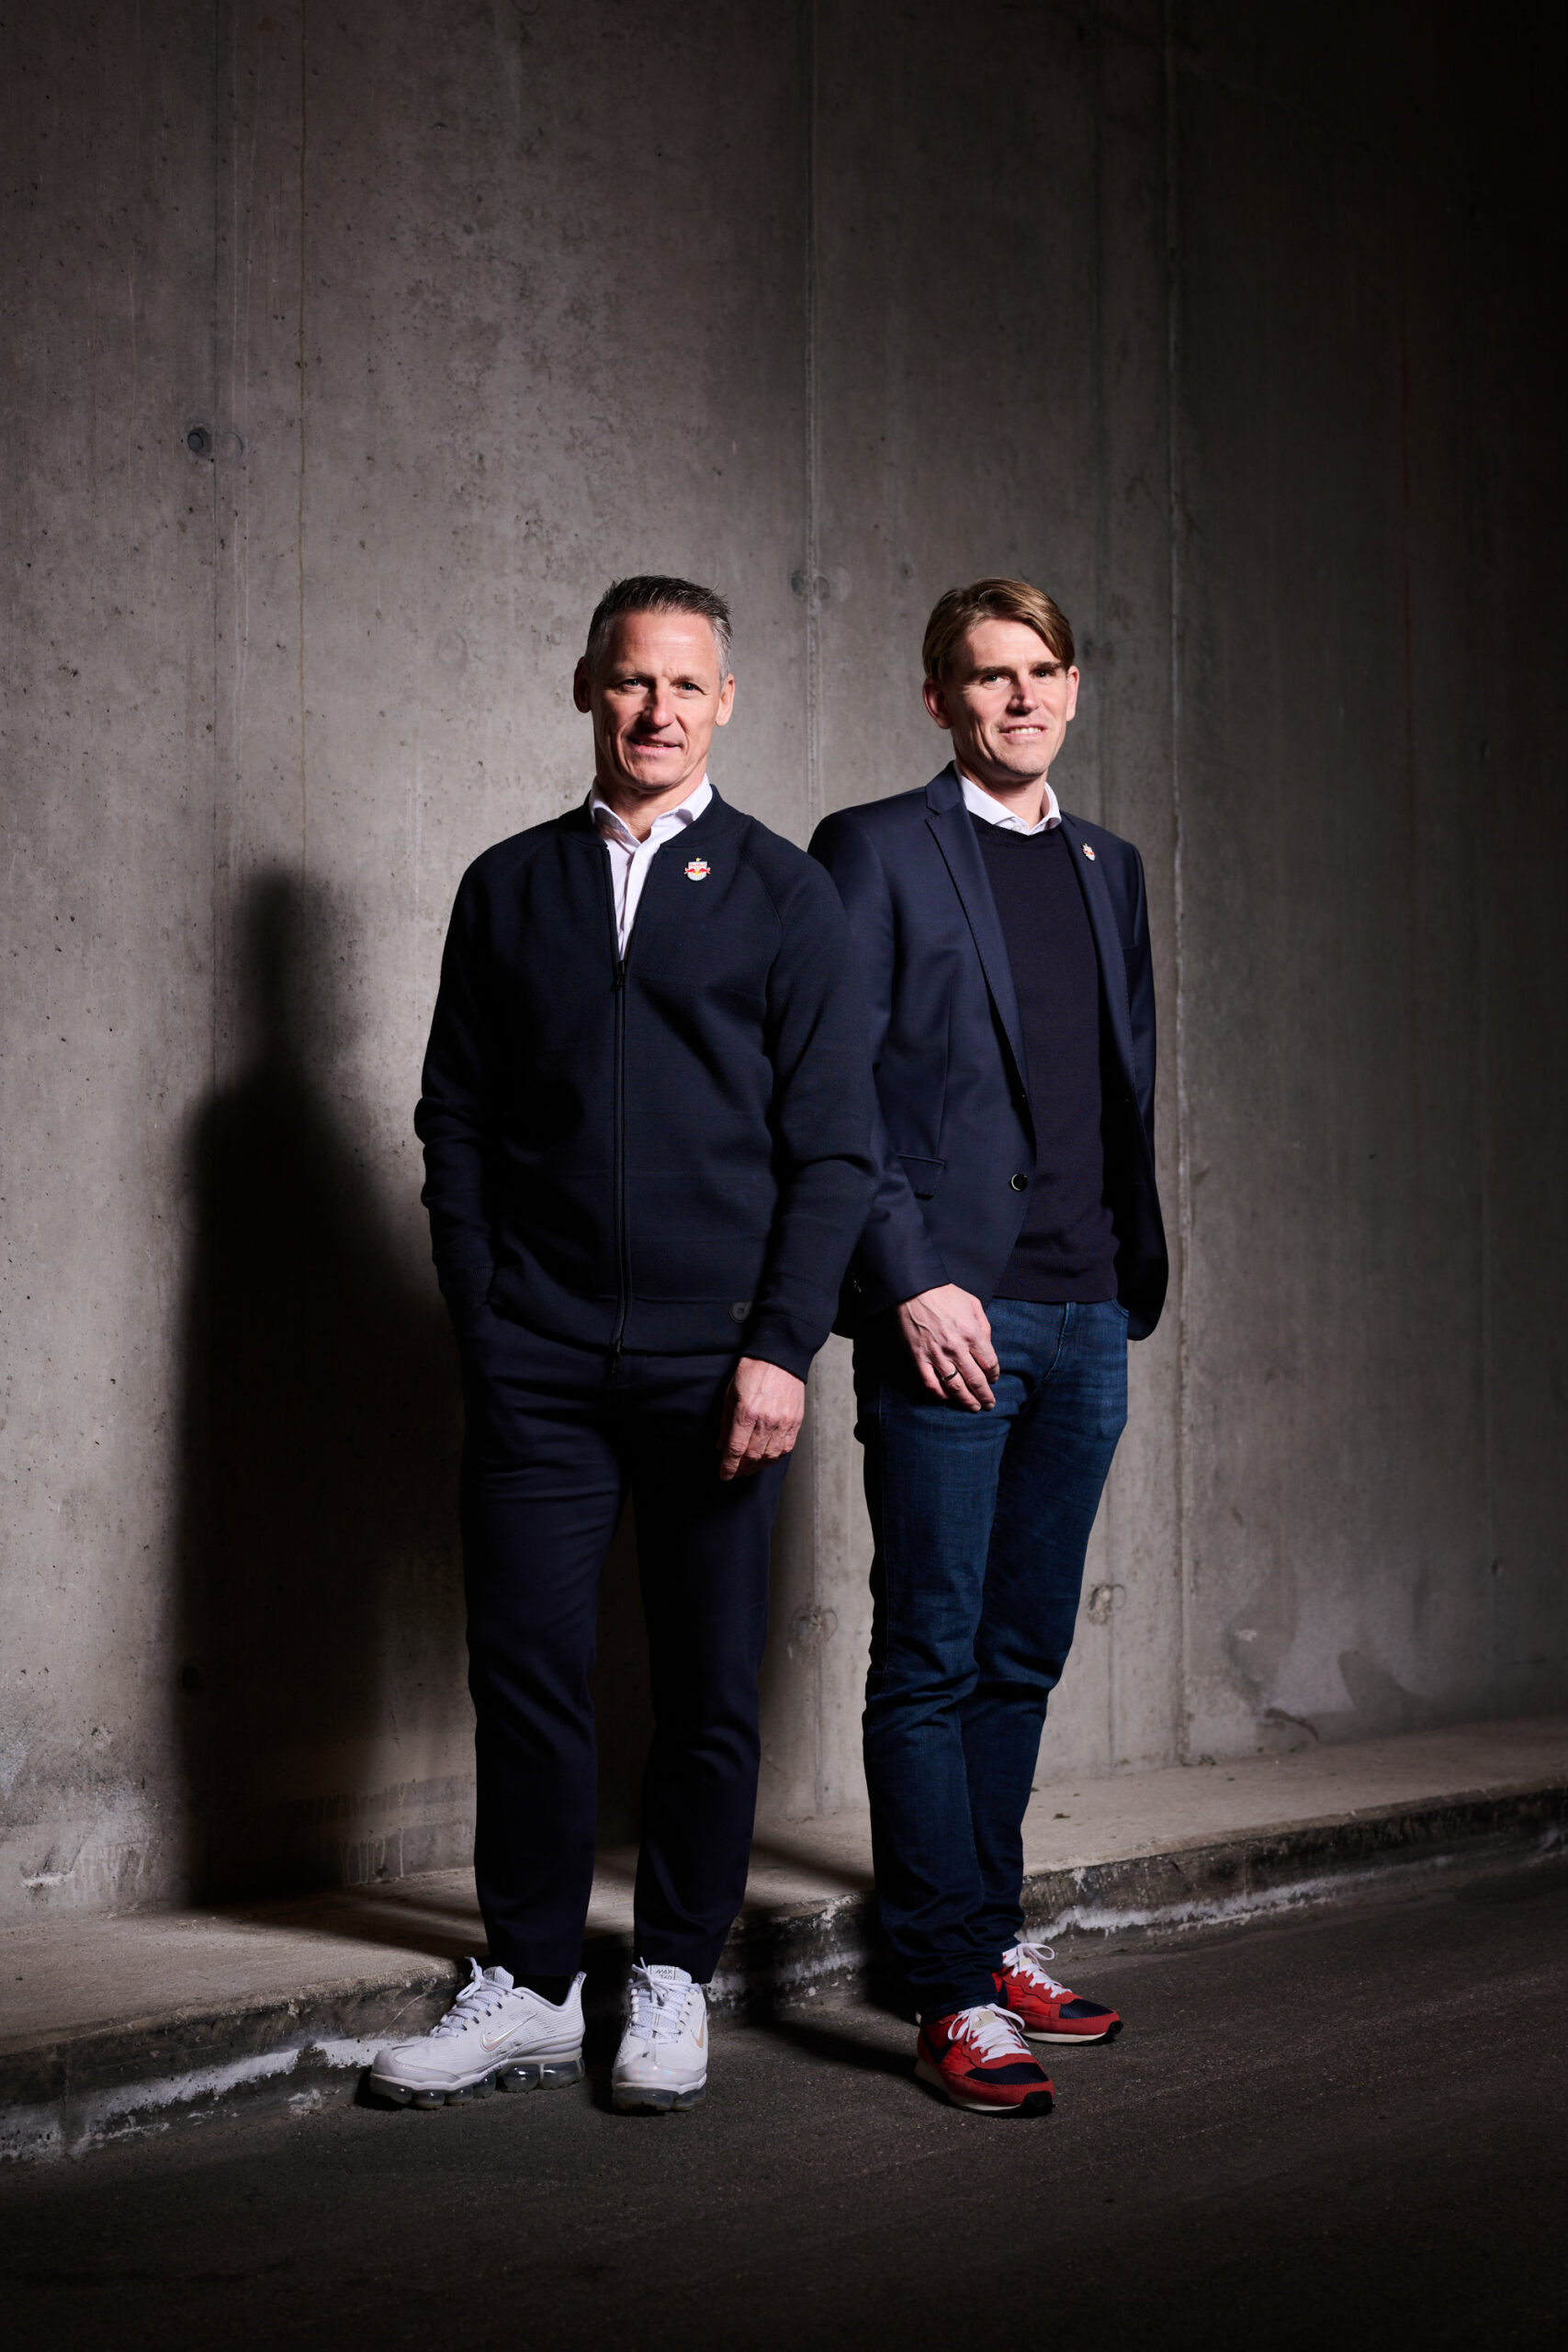 Christoph Freund and Stefan Reiter for AUDI